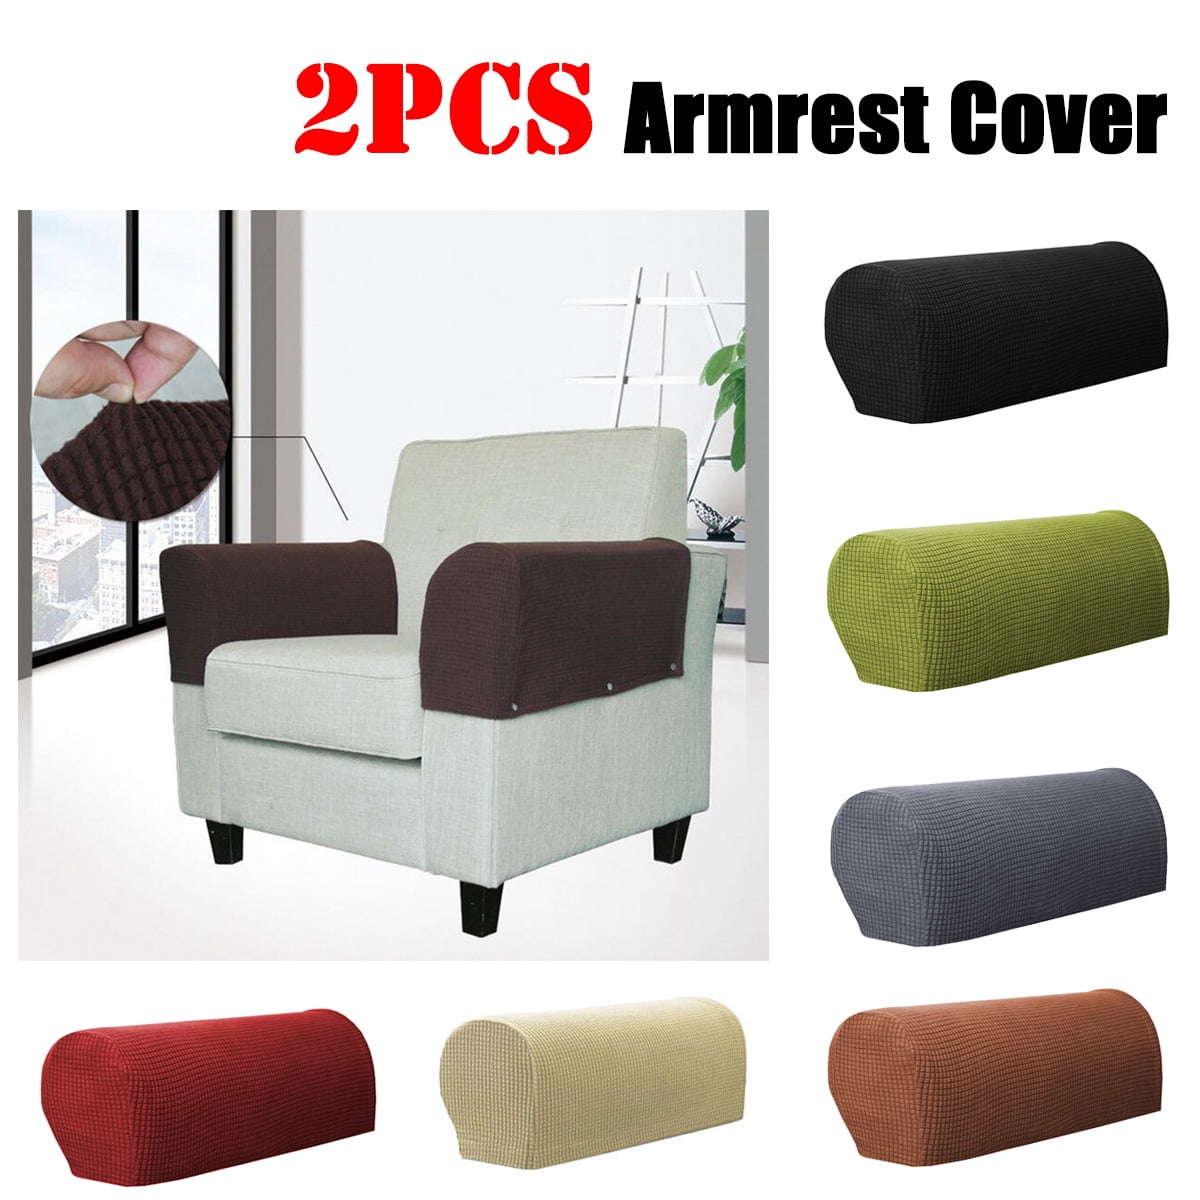 2PCS Removable Armrest Covers Furniture Stretchy Chair Sofa Couch Arm Protector